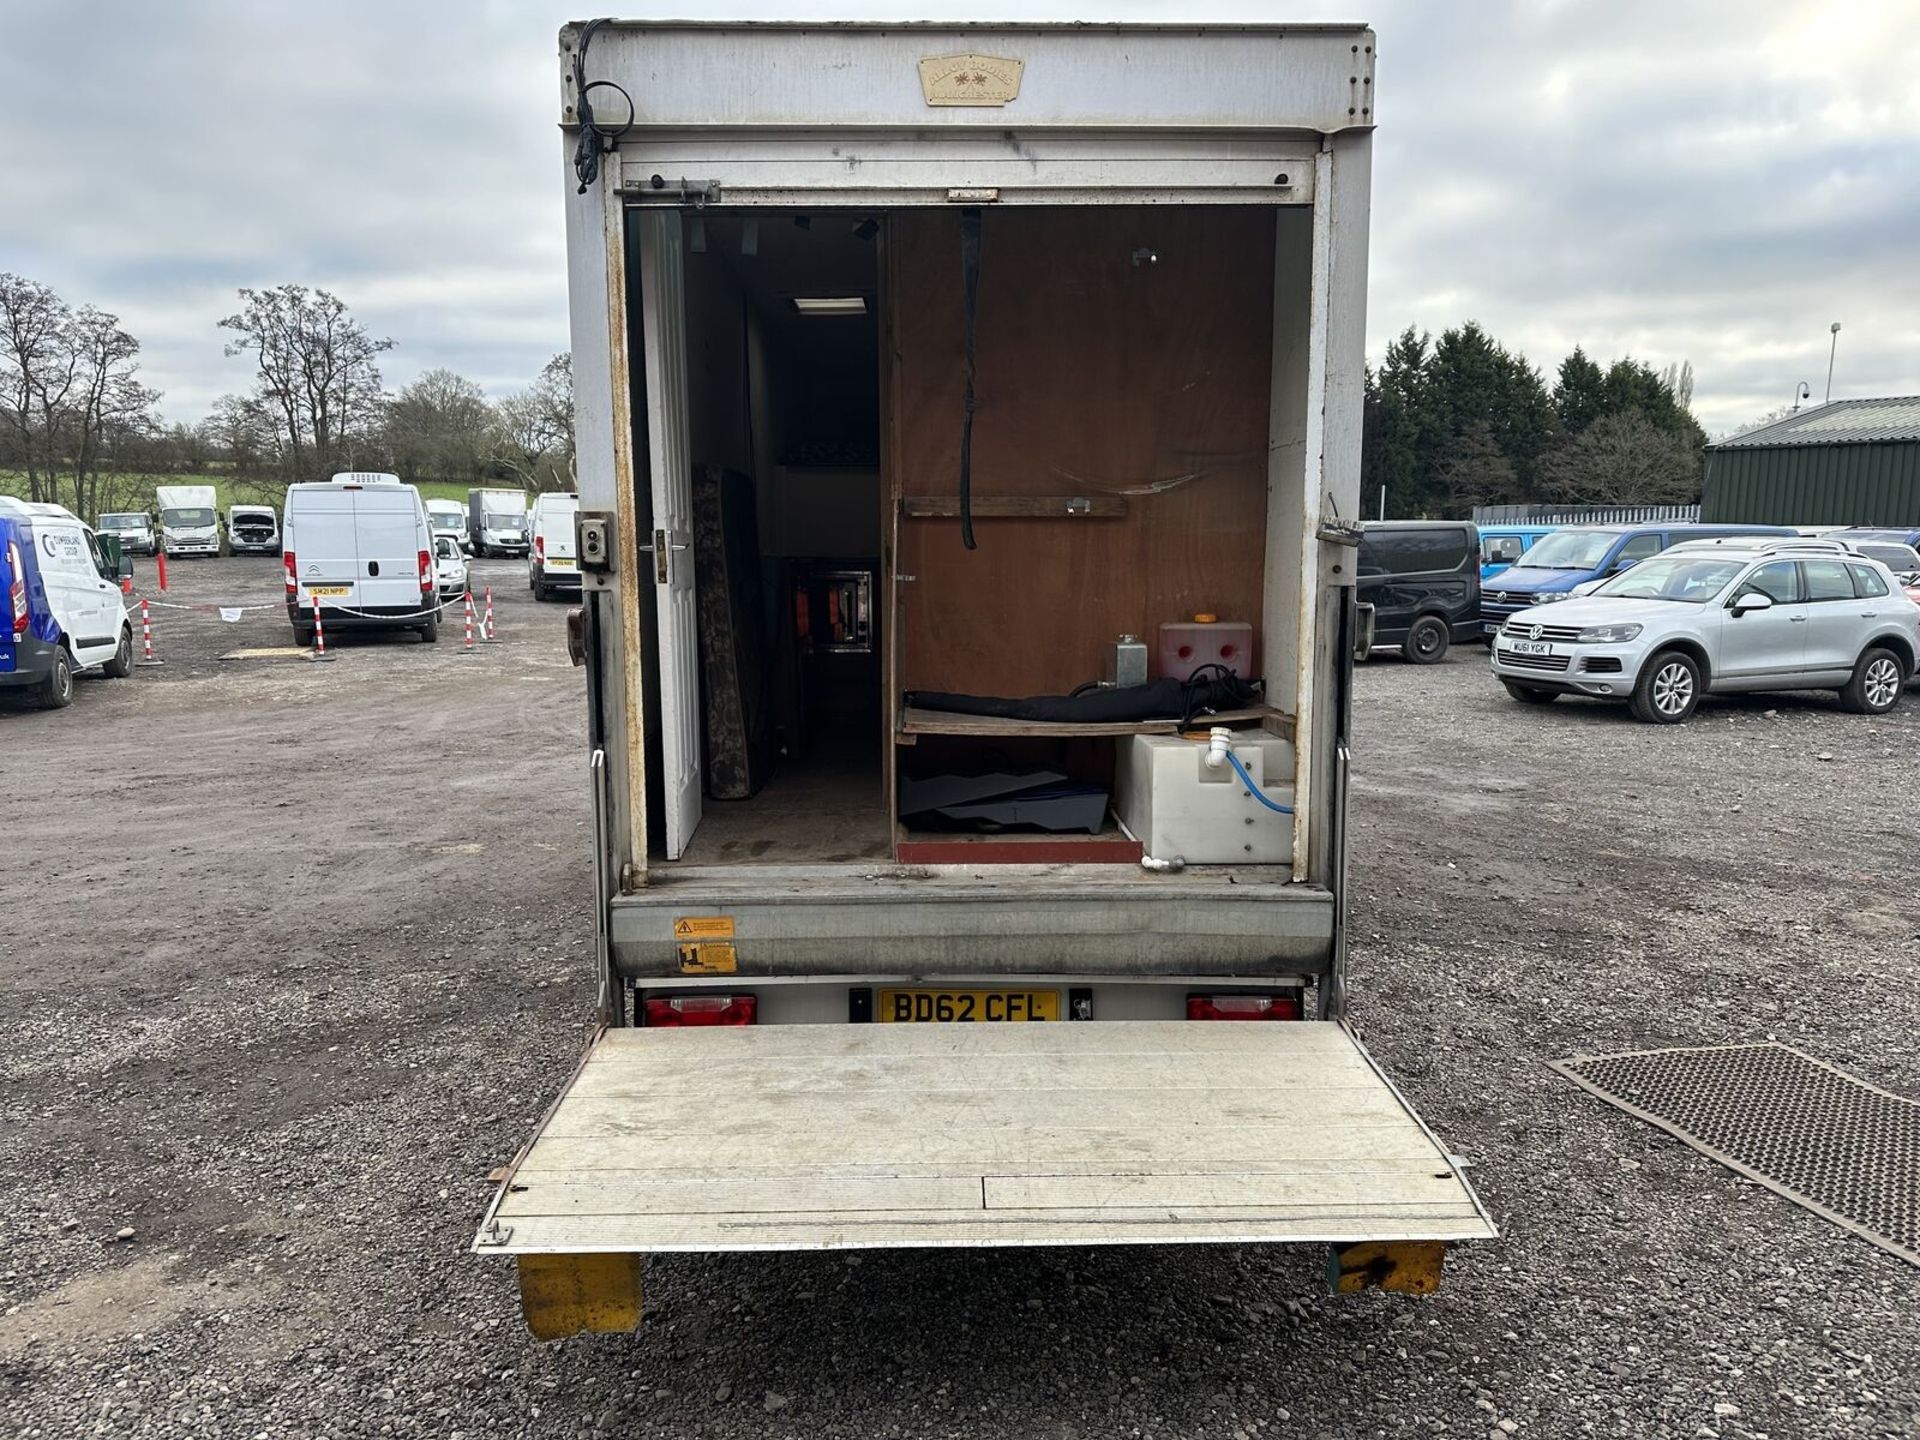 62 PLATE IVECO DAILY LUTON BOX CAMPER, SOLAR PANELS, DIESEL HEATER >>--NO VAT ON HAMMER--<< - Image 12 of 19